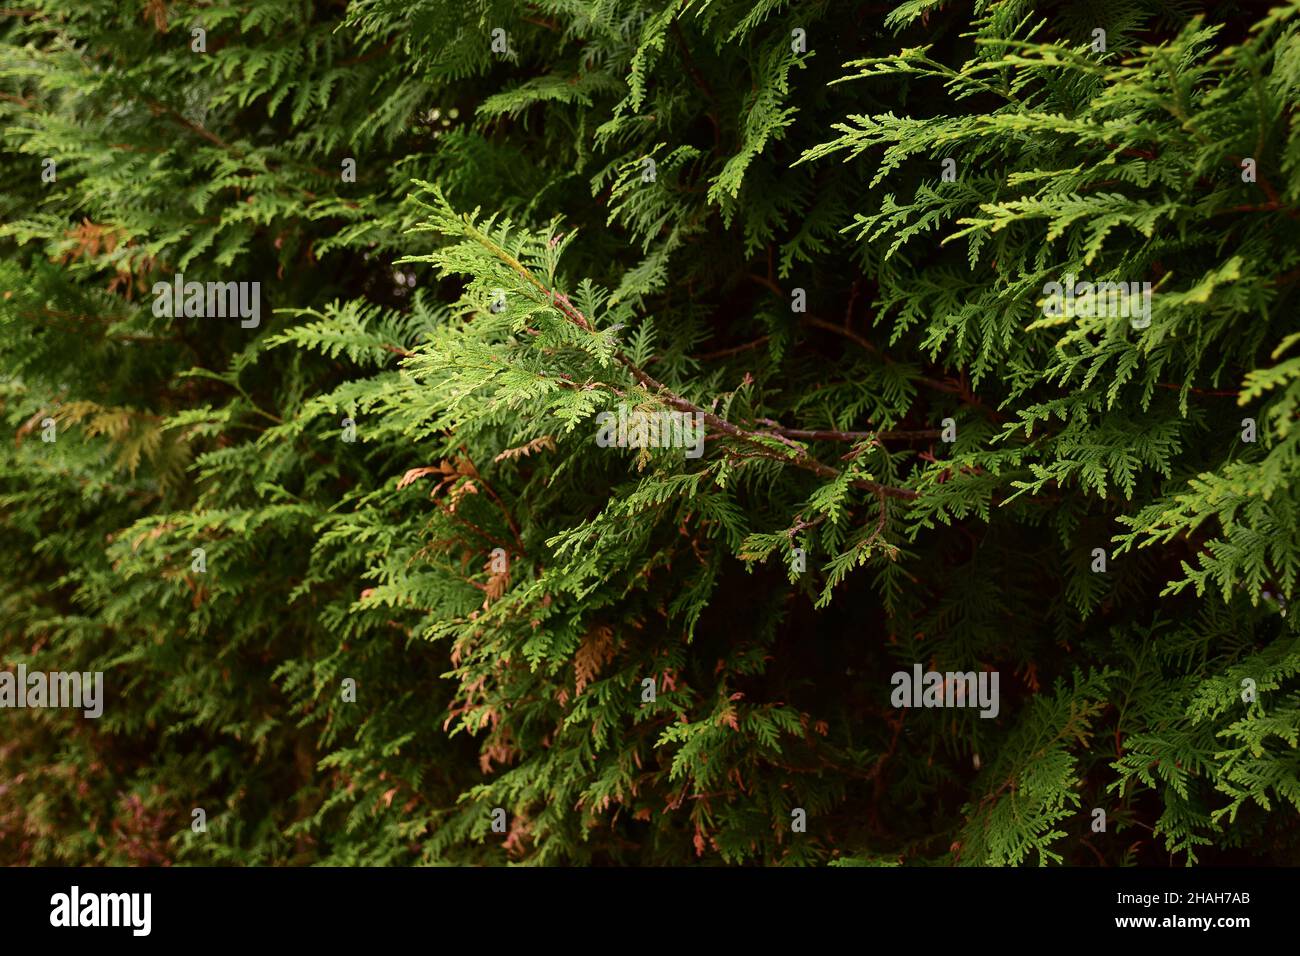 A fence from a green shrub of a thuja plant leaving in perspective for the whole frame Stock Photo